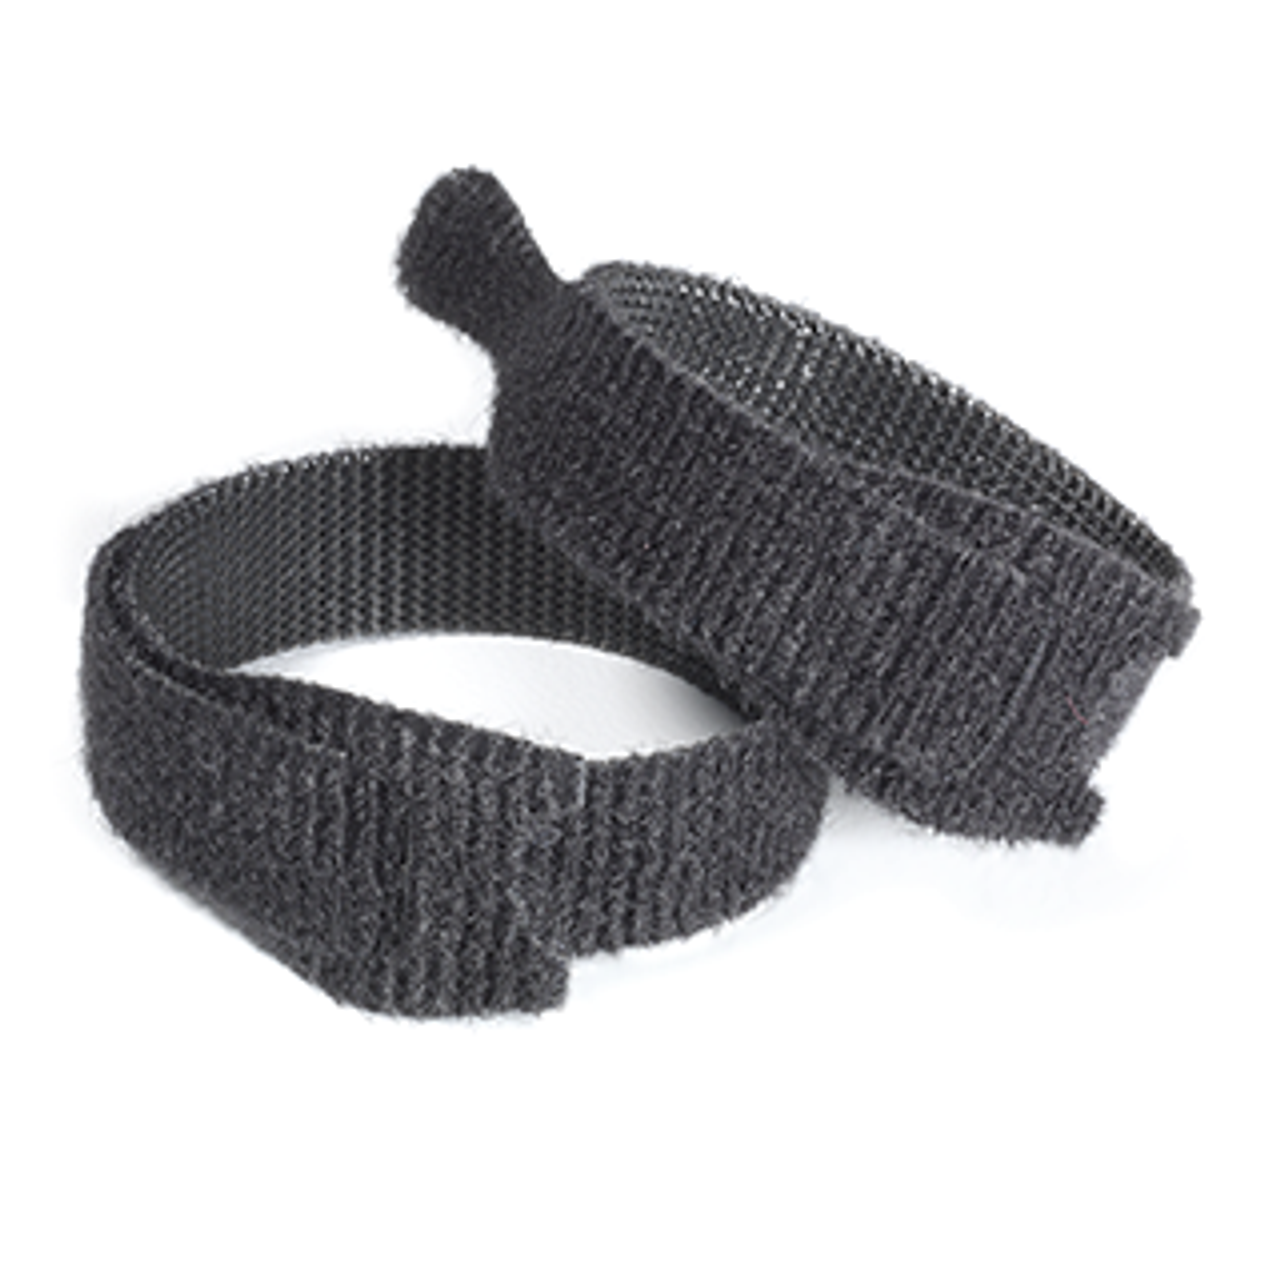 Buy 13 Inches Velcro/Nylon Wrist Straps, Set of 4 for only $88 at Z&Z  Medical